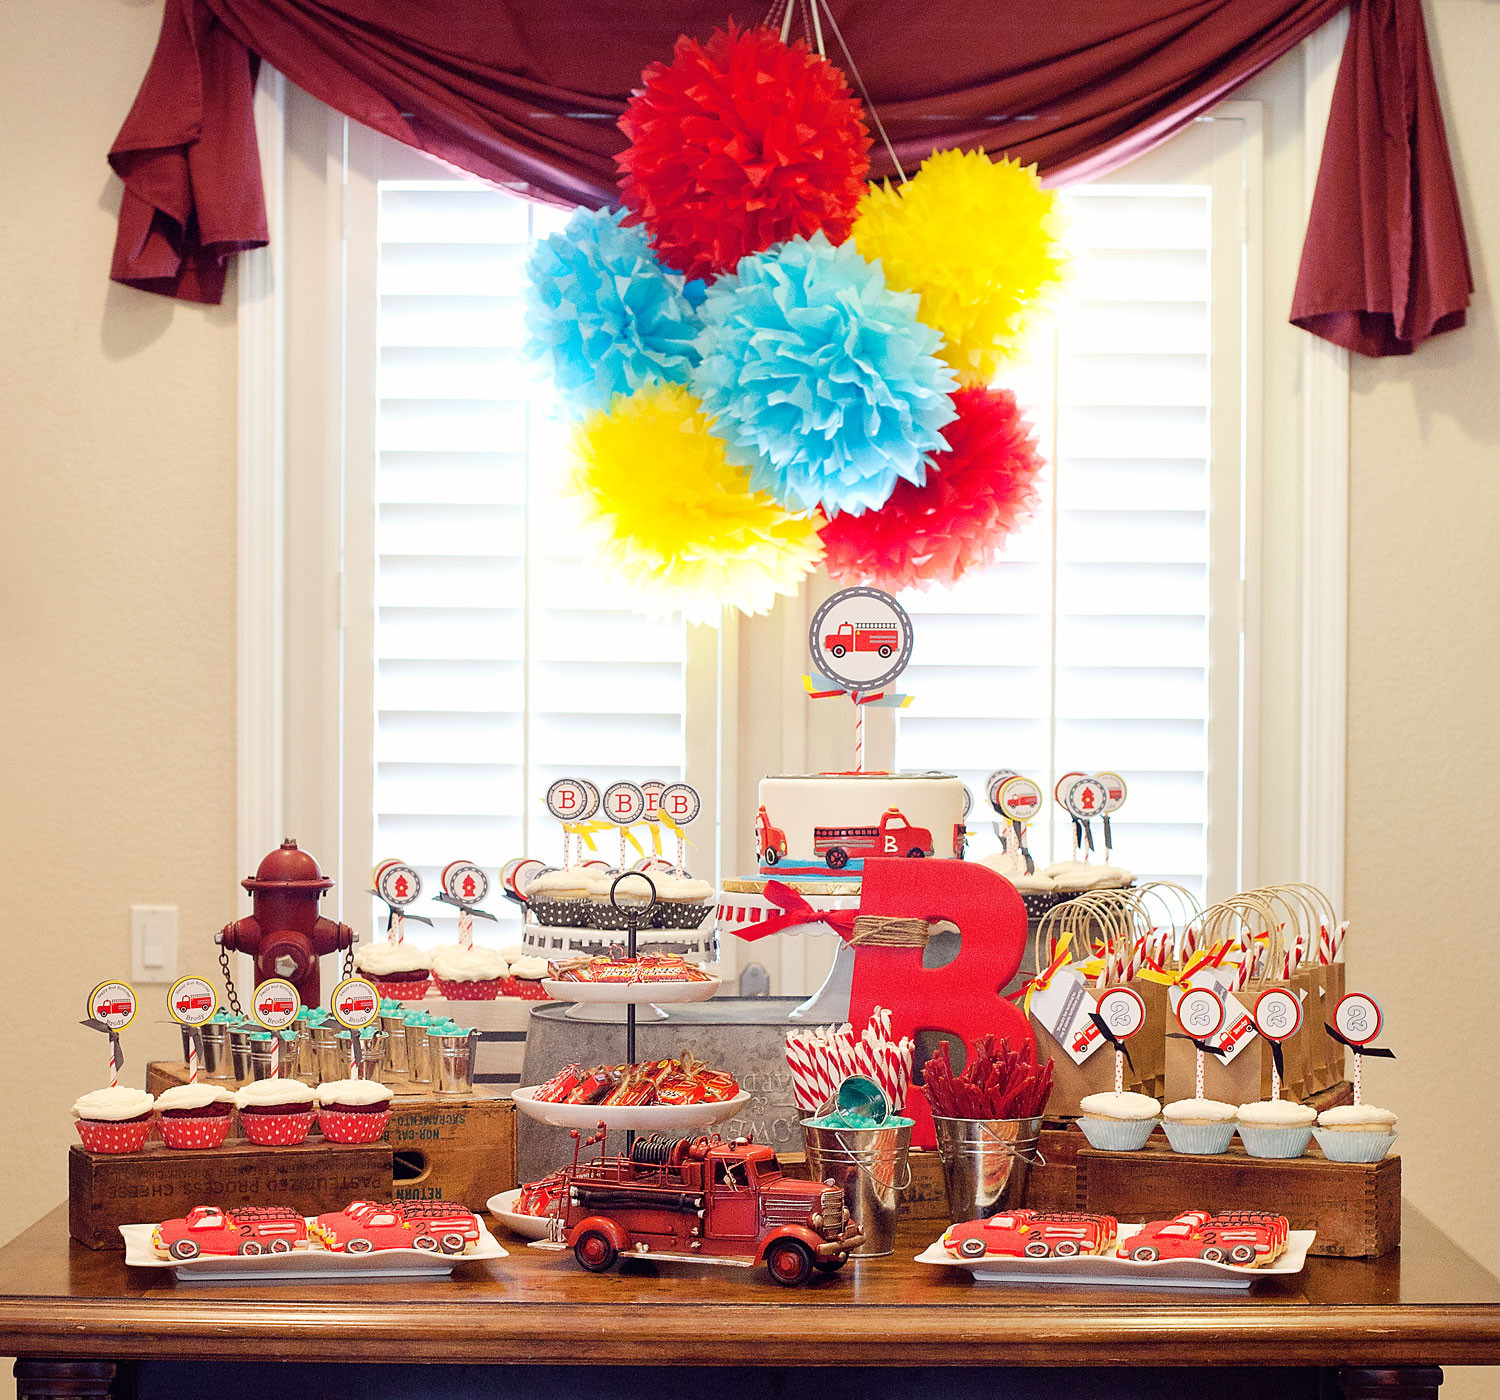 Birthday Party Decoration
 A Vintage Firetruck Birthday Party Anders Ruff Custom